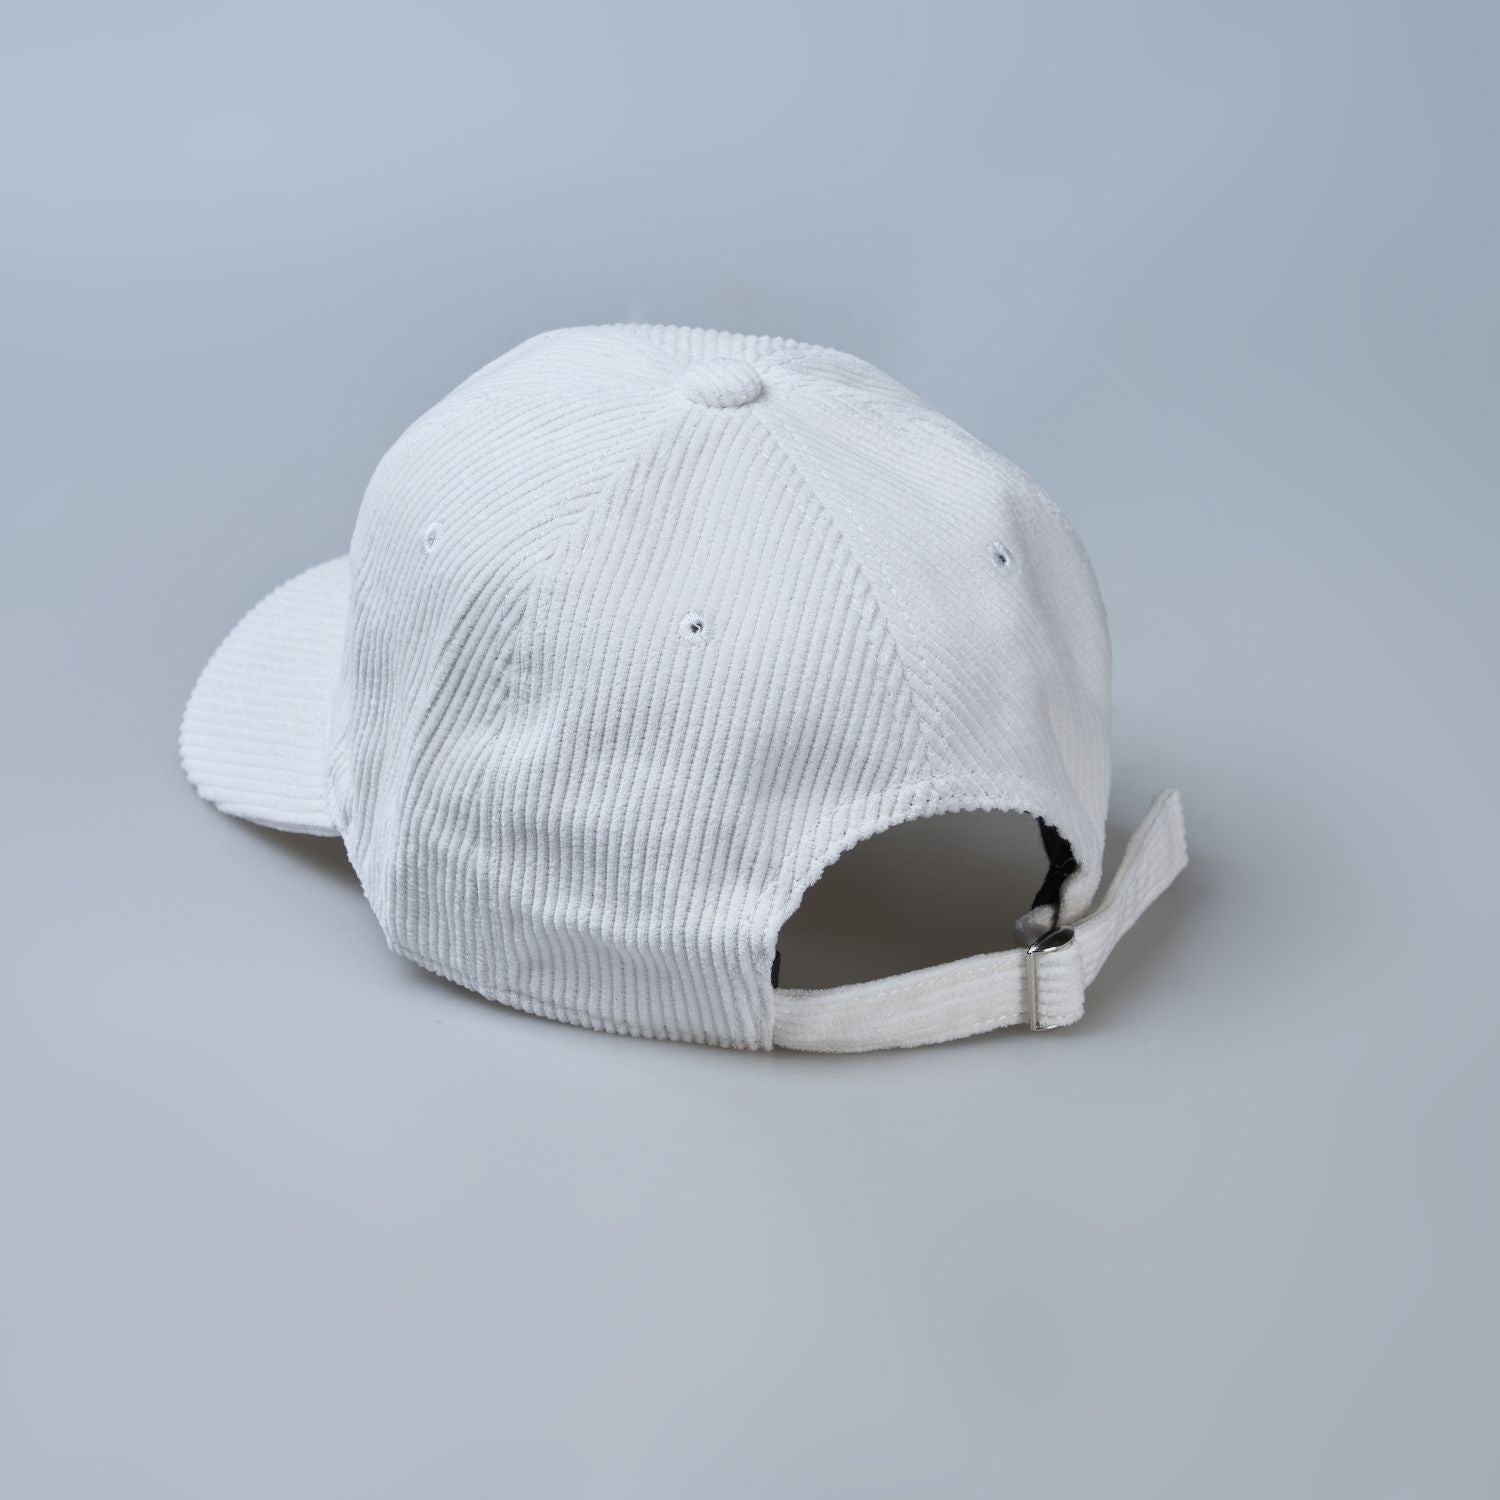 White colored cap for men with 'what' text written on it, back view.